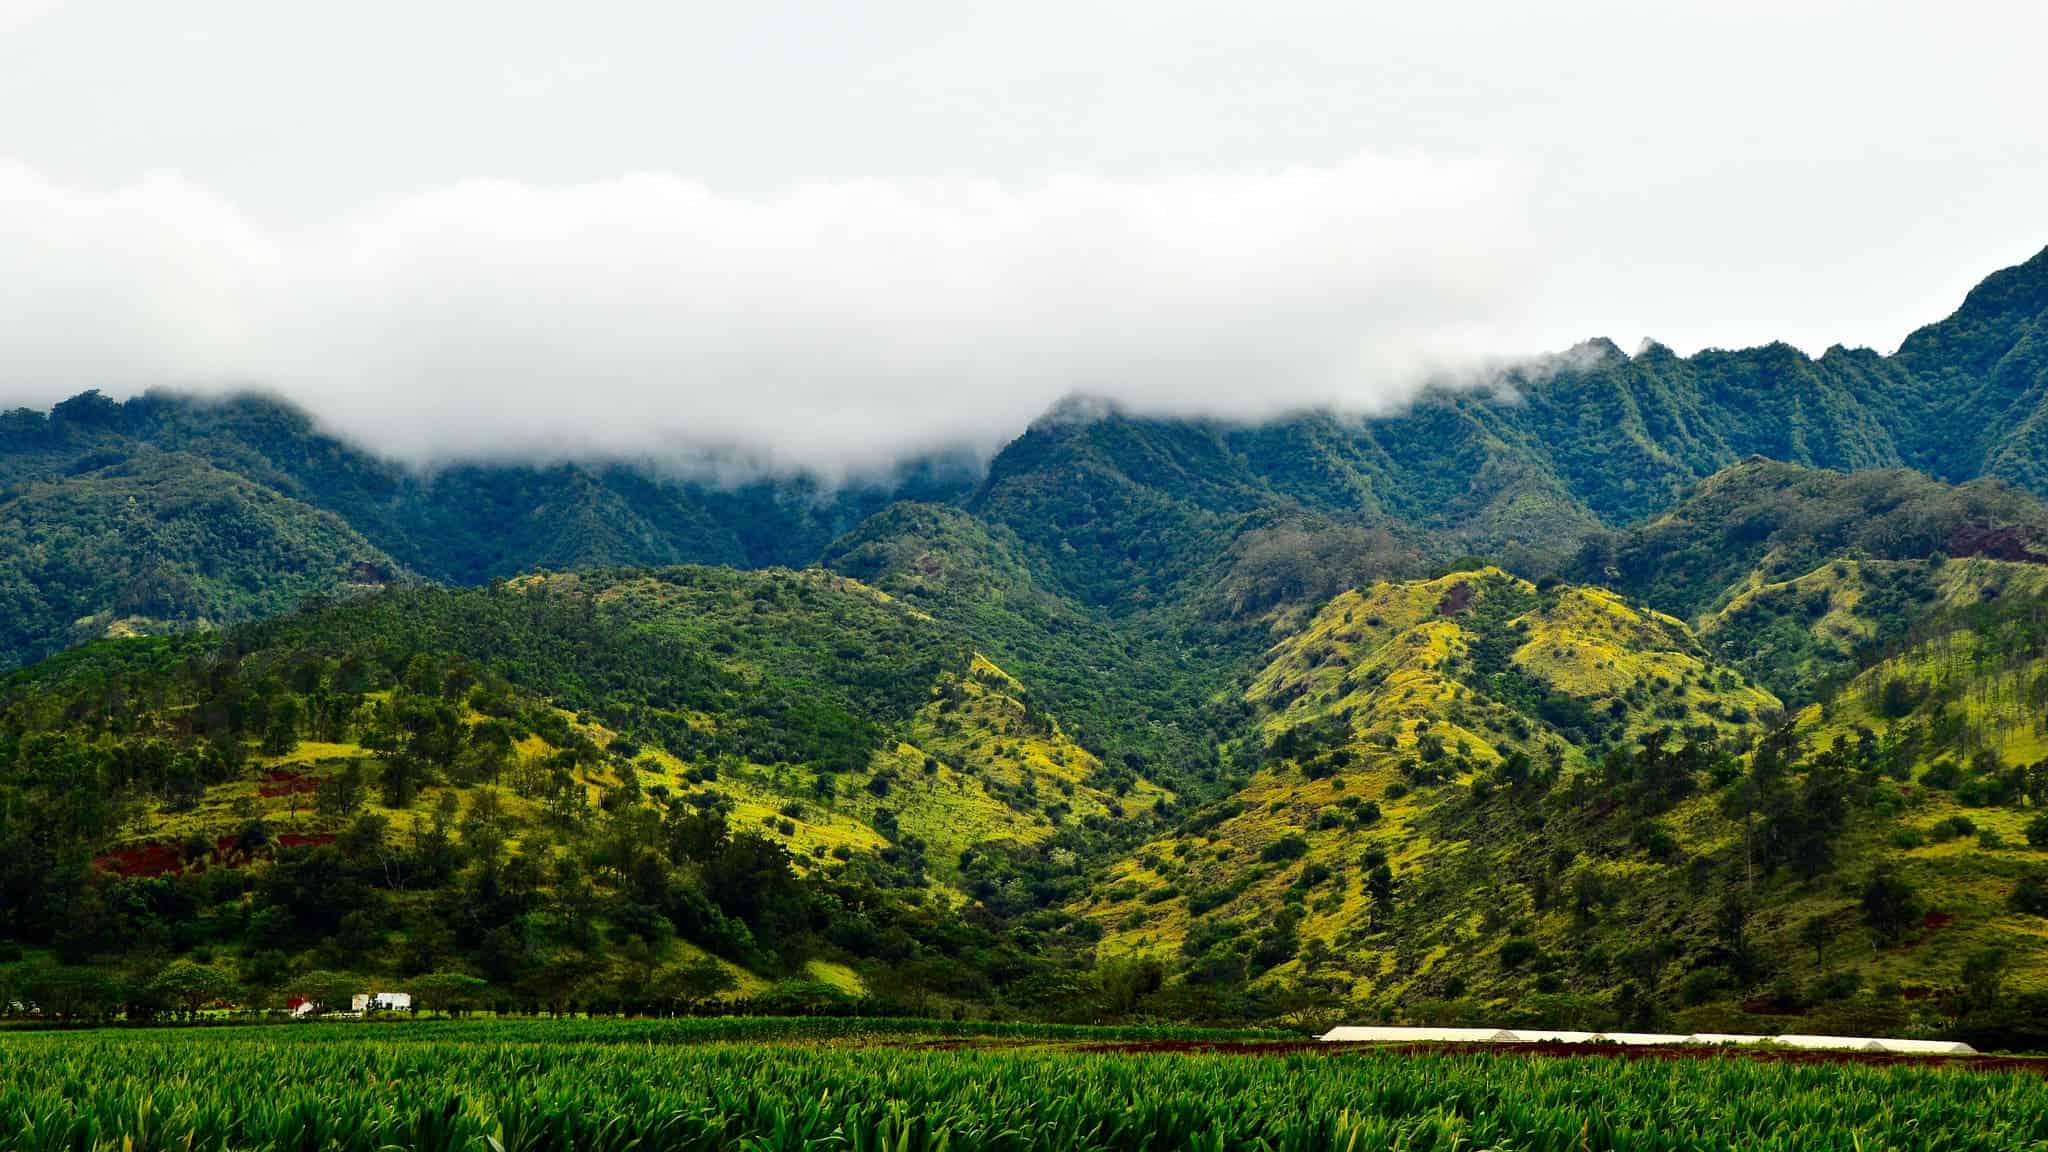 Fields of green: volcanic soils often host rich, lush vegetation, as can be seen in this photo of Oahu. Image credits: Jason Jacobs / Flickr.